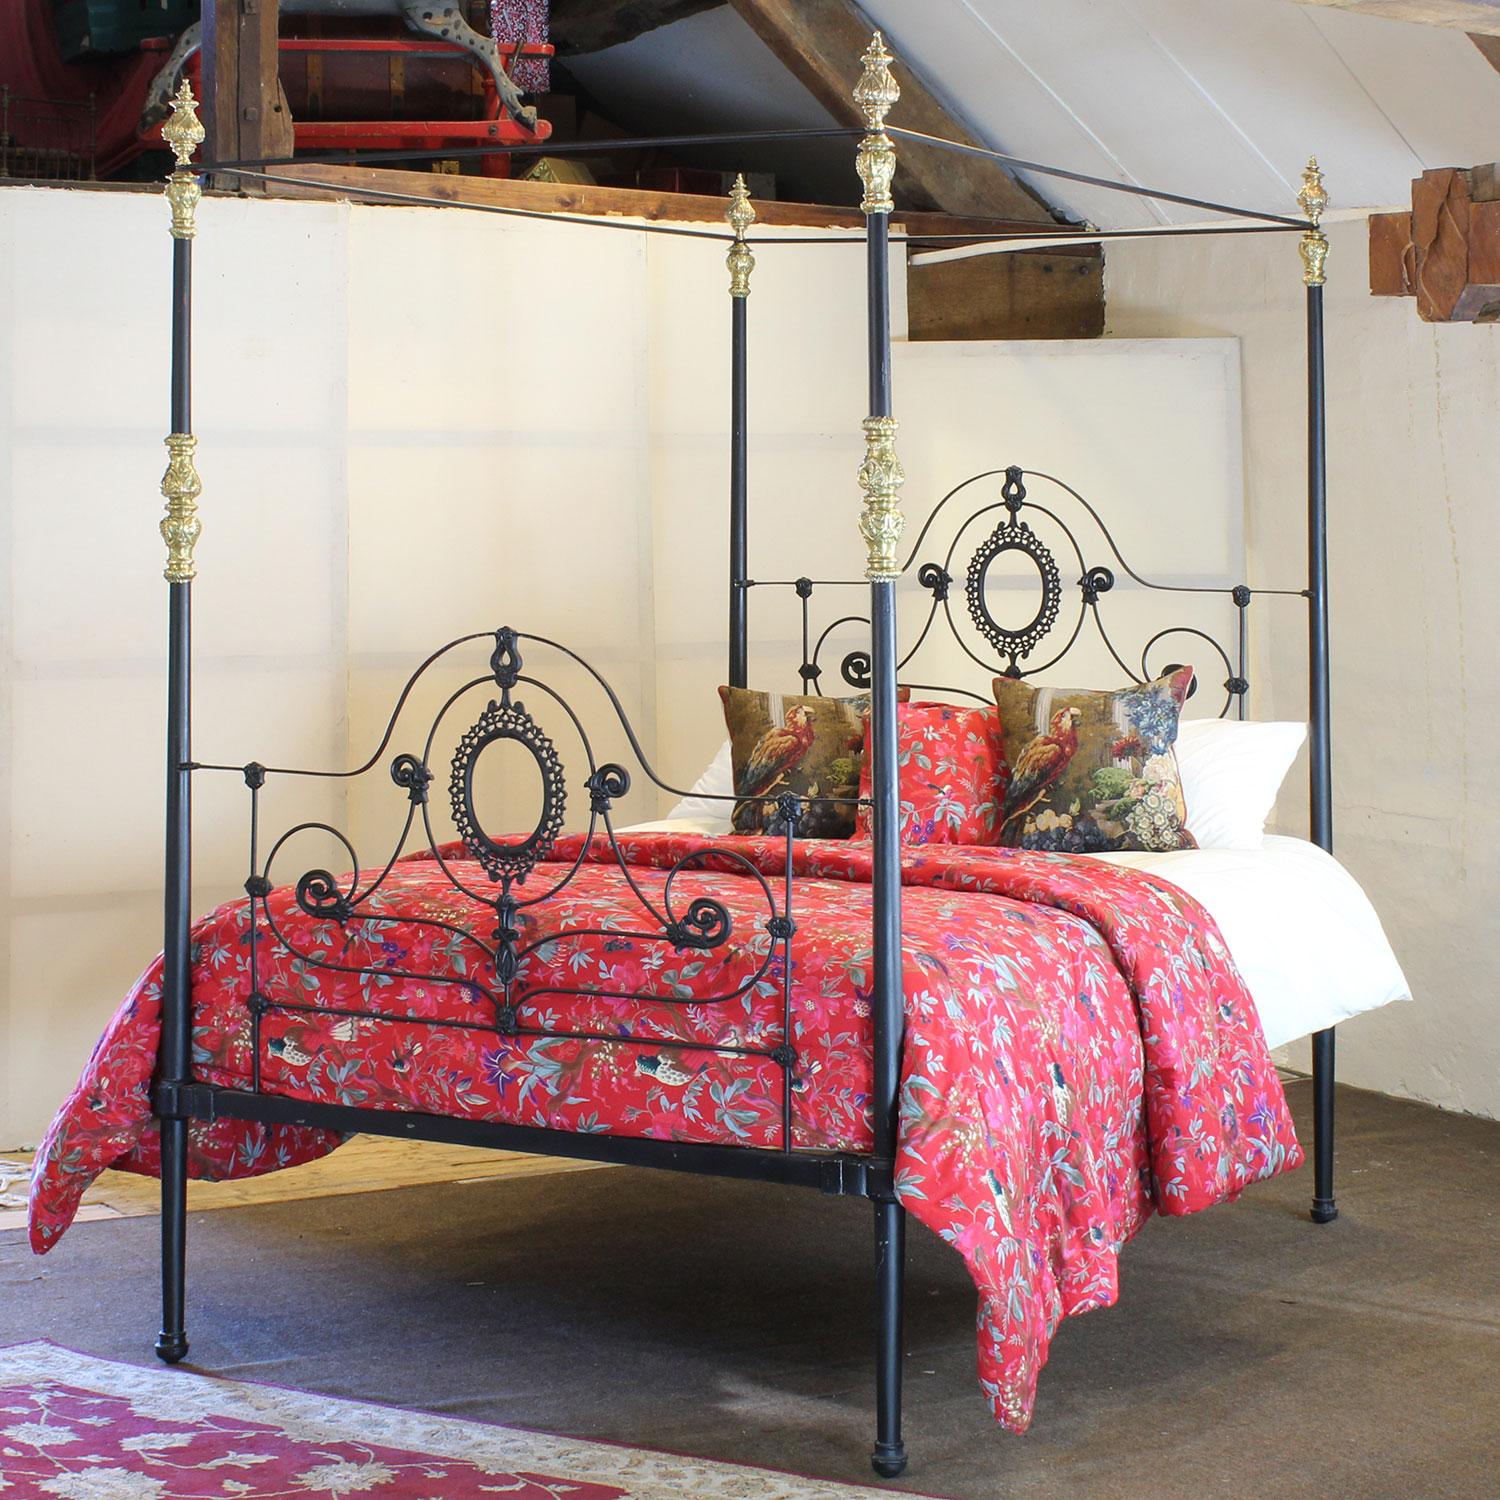 A 5ft wide cast iron antique four poster bed finished in black with ornate castings and original brass decoration. 

This bed accepts a British King Size or US Queen Size (5ft or 150cm wide) base and mattress set.

The price includes a firm bed base